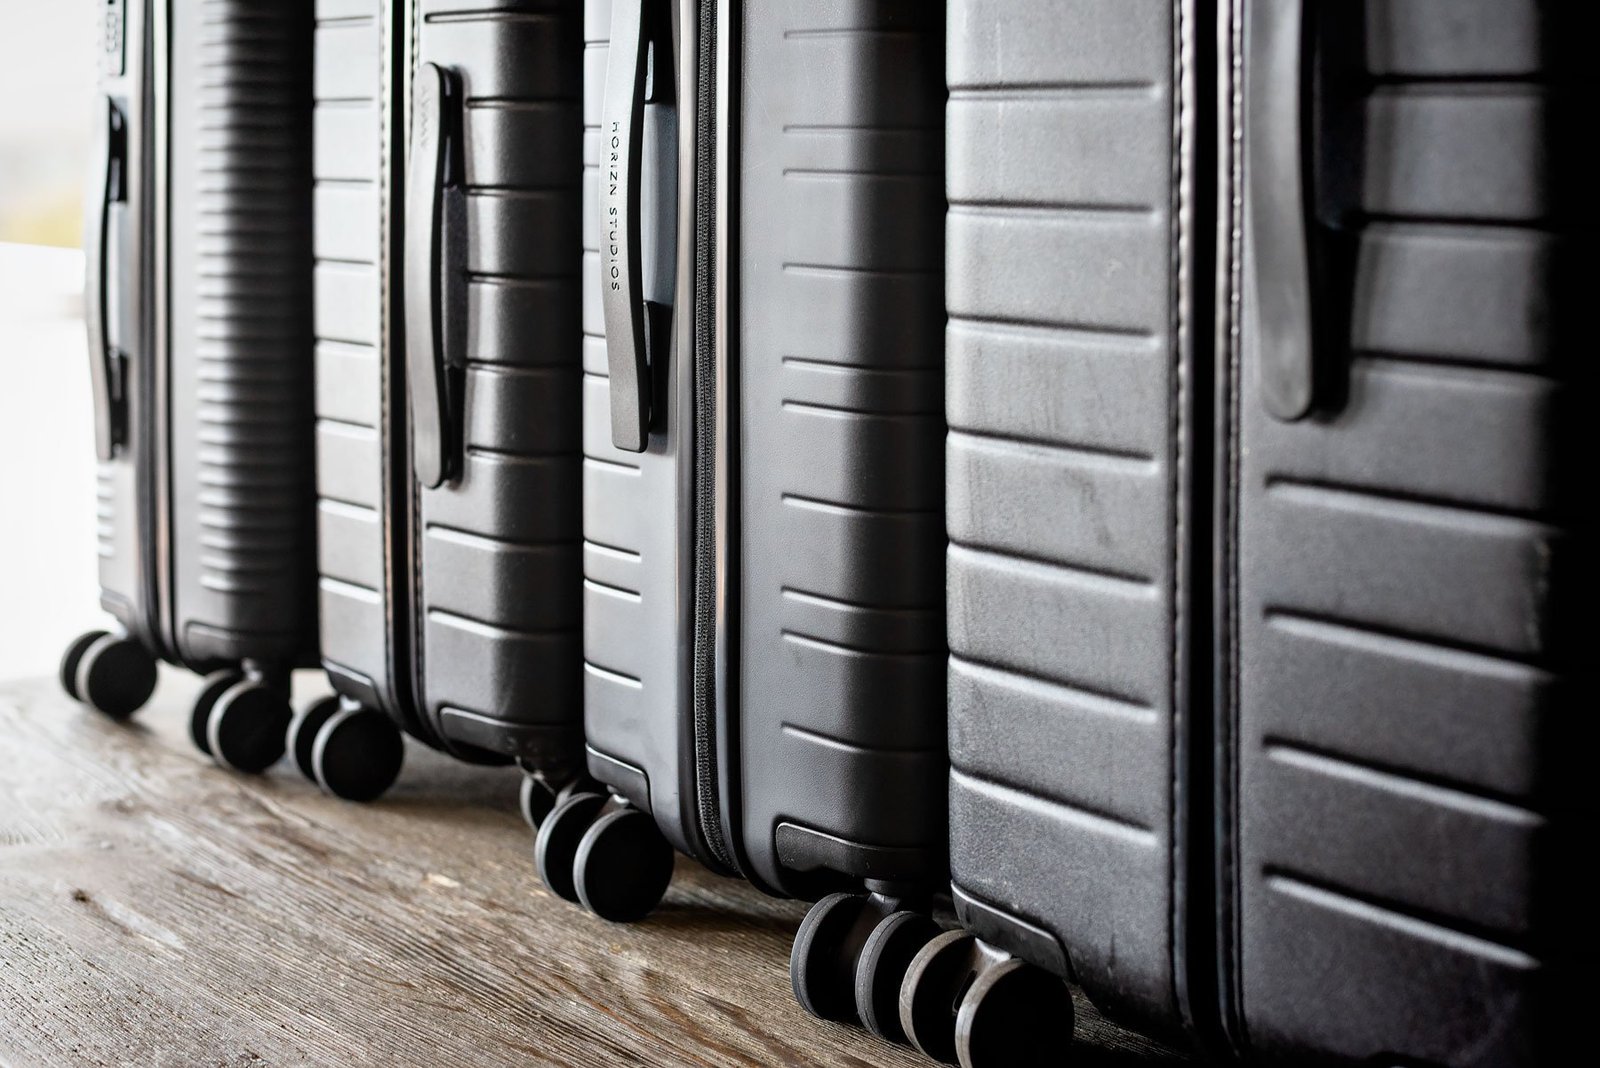 Smart Luggage: Horizn Studios versus Away. Which Smart Suitcase is better? Comparison between Away and Horizn Studios, both carry-on and check-in suitcase. With video!